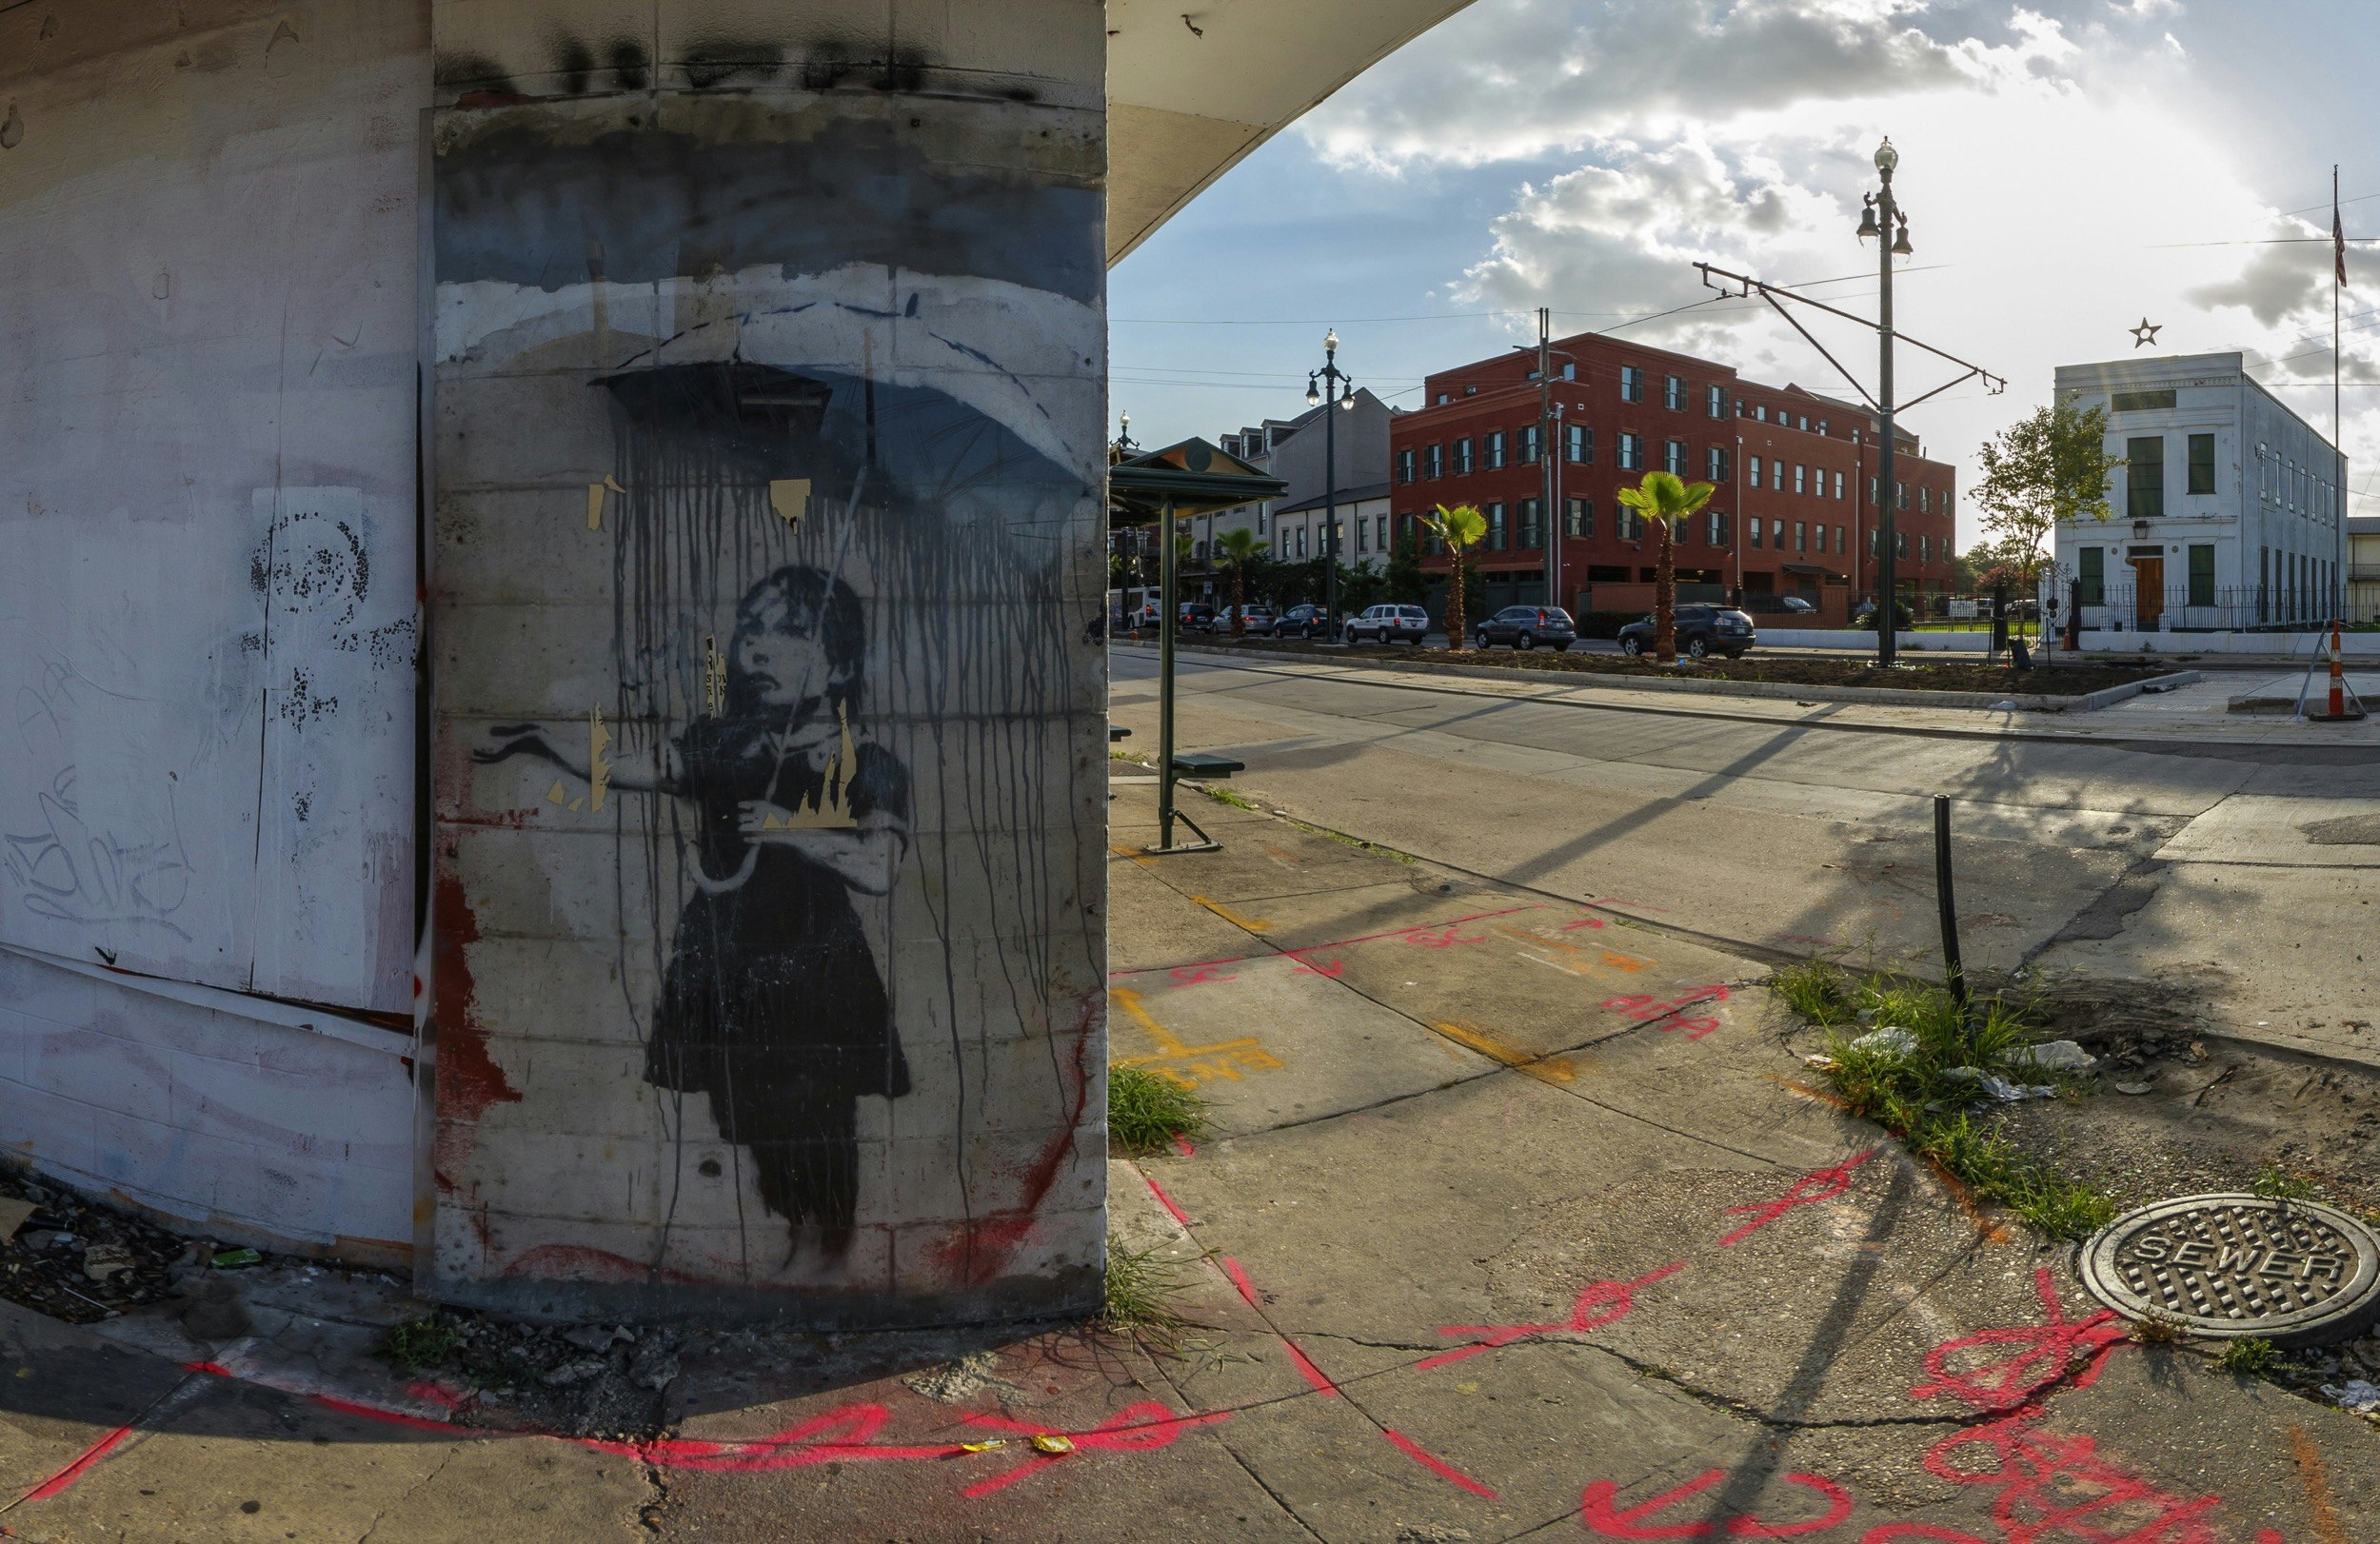 A painting of a girl reaching out from under an umbrella is painted on a building in New Orleans; Banksy in America